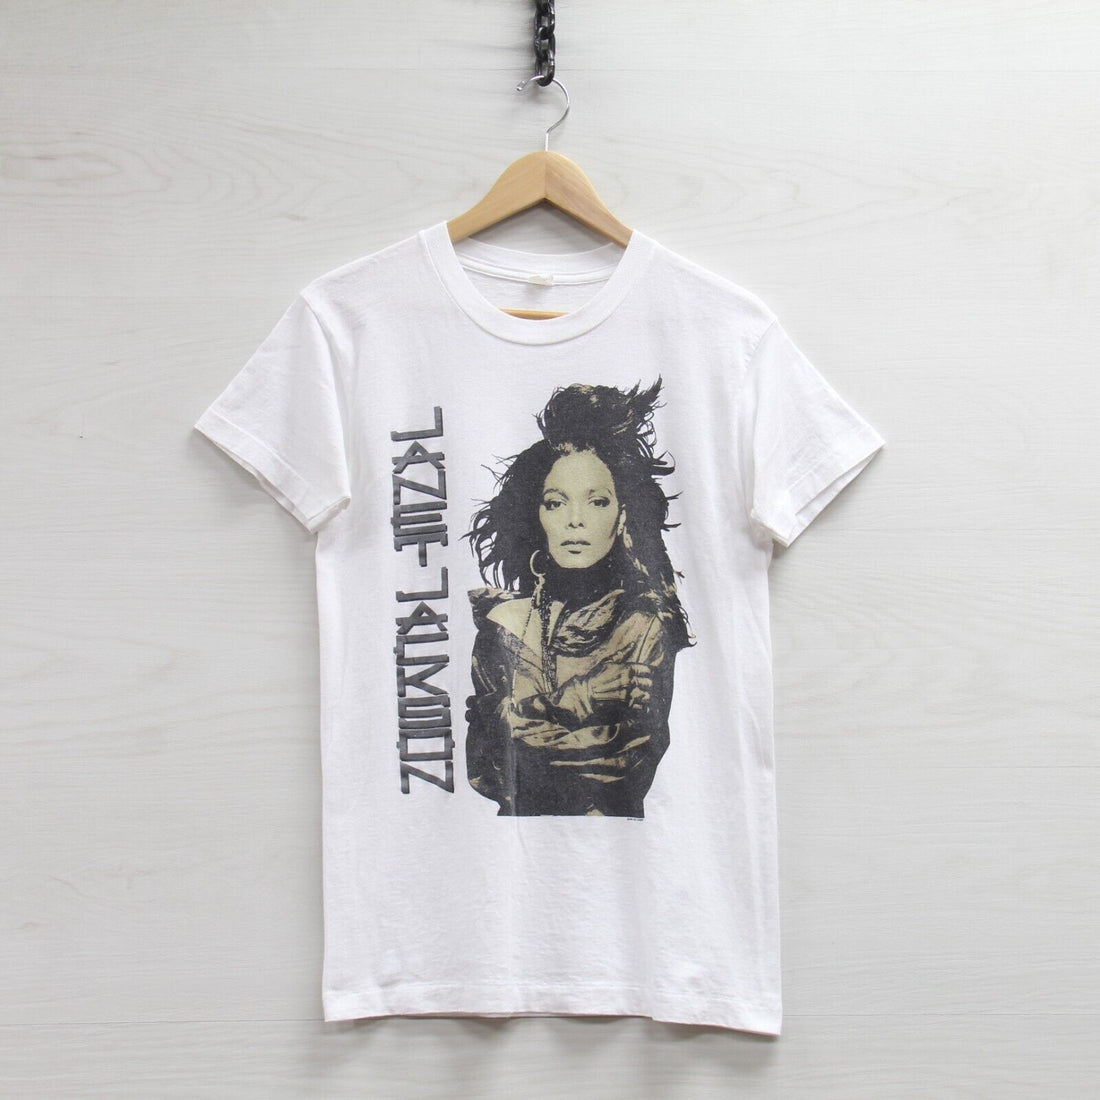 Vintage Janet Jackson T-Shirt Size Small 1990 90s